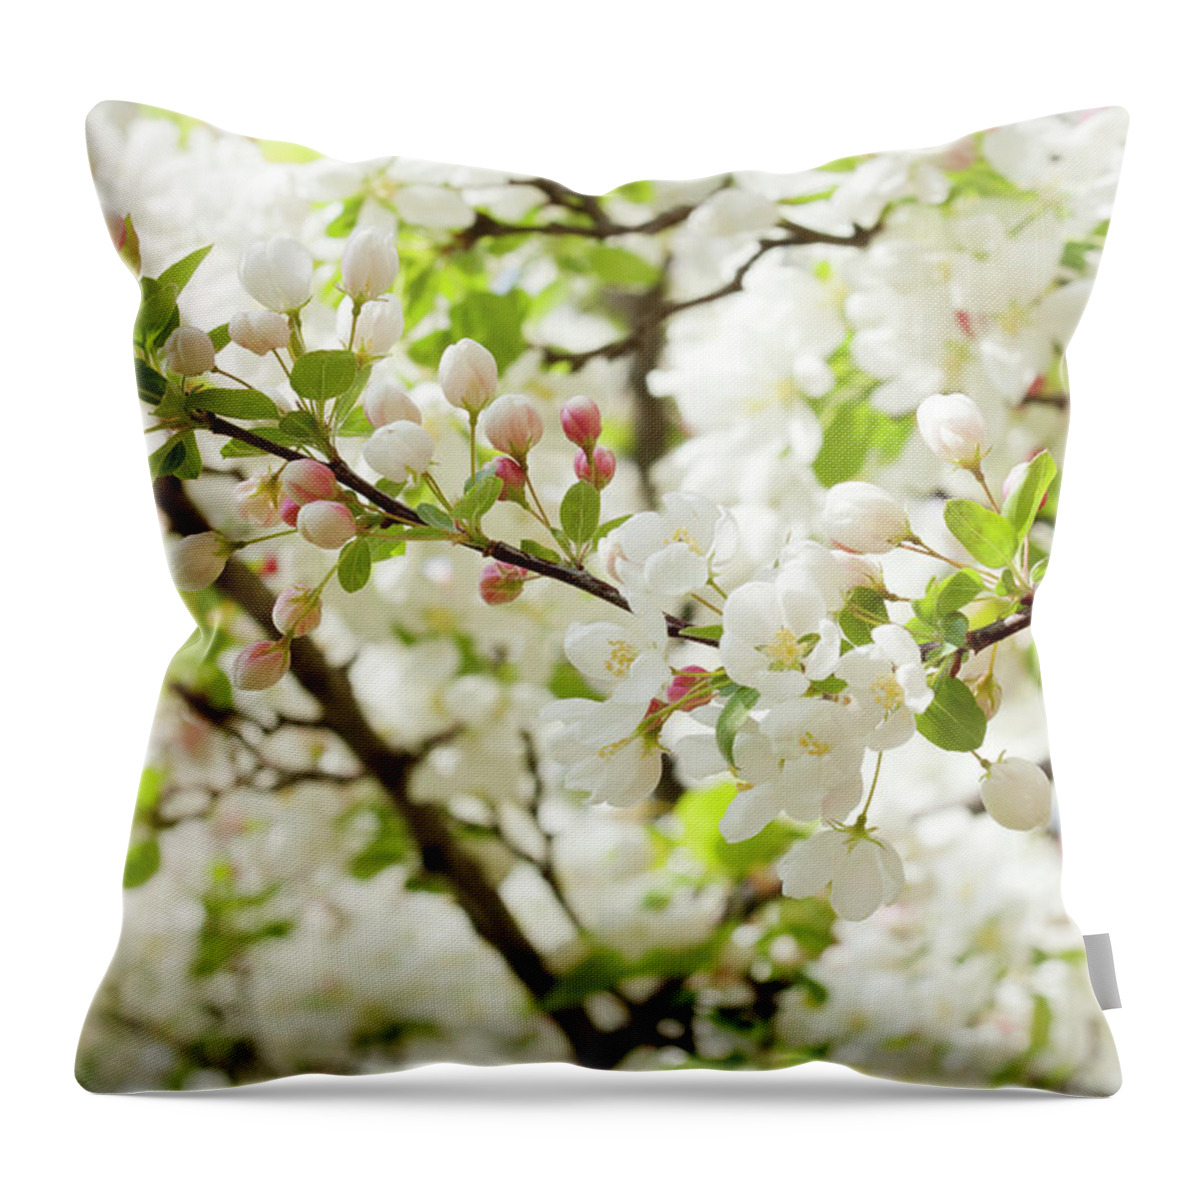 Full Frame Throw Pillow featuring the photograph Apple Blossoms by Patty c